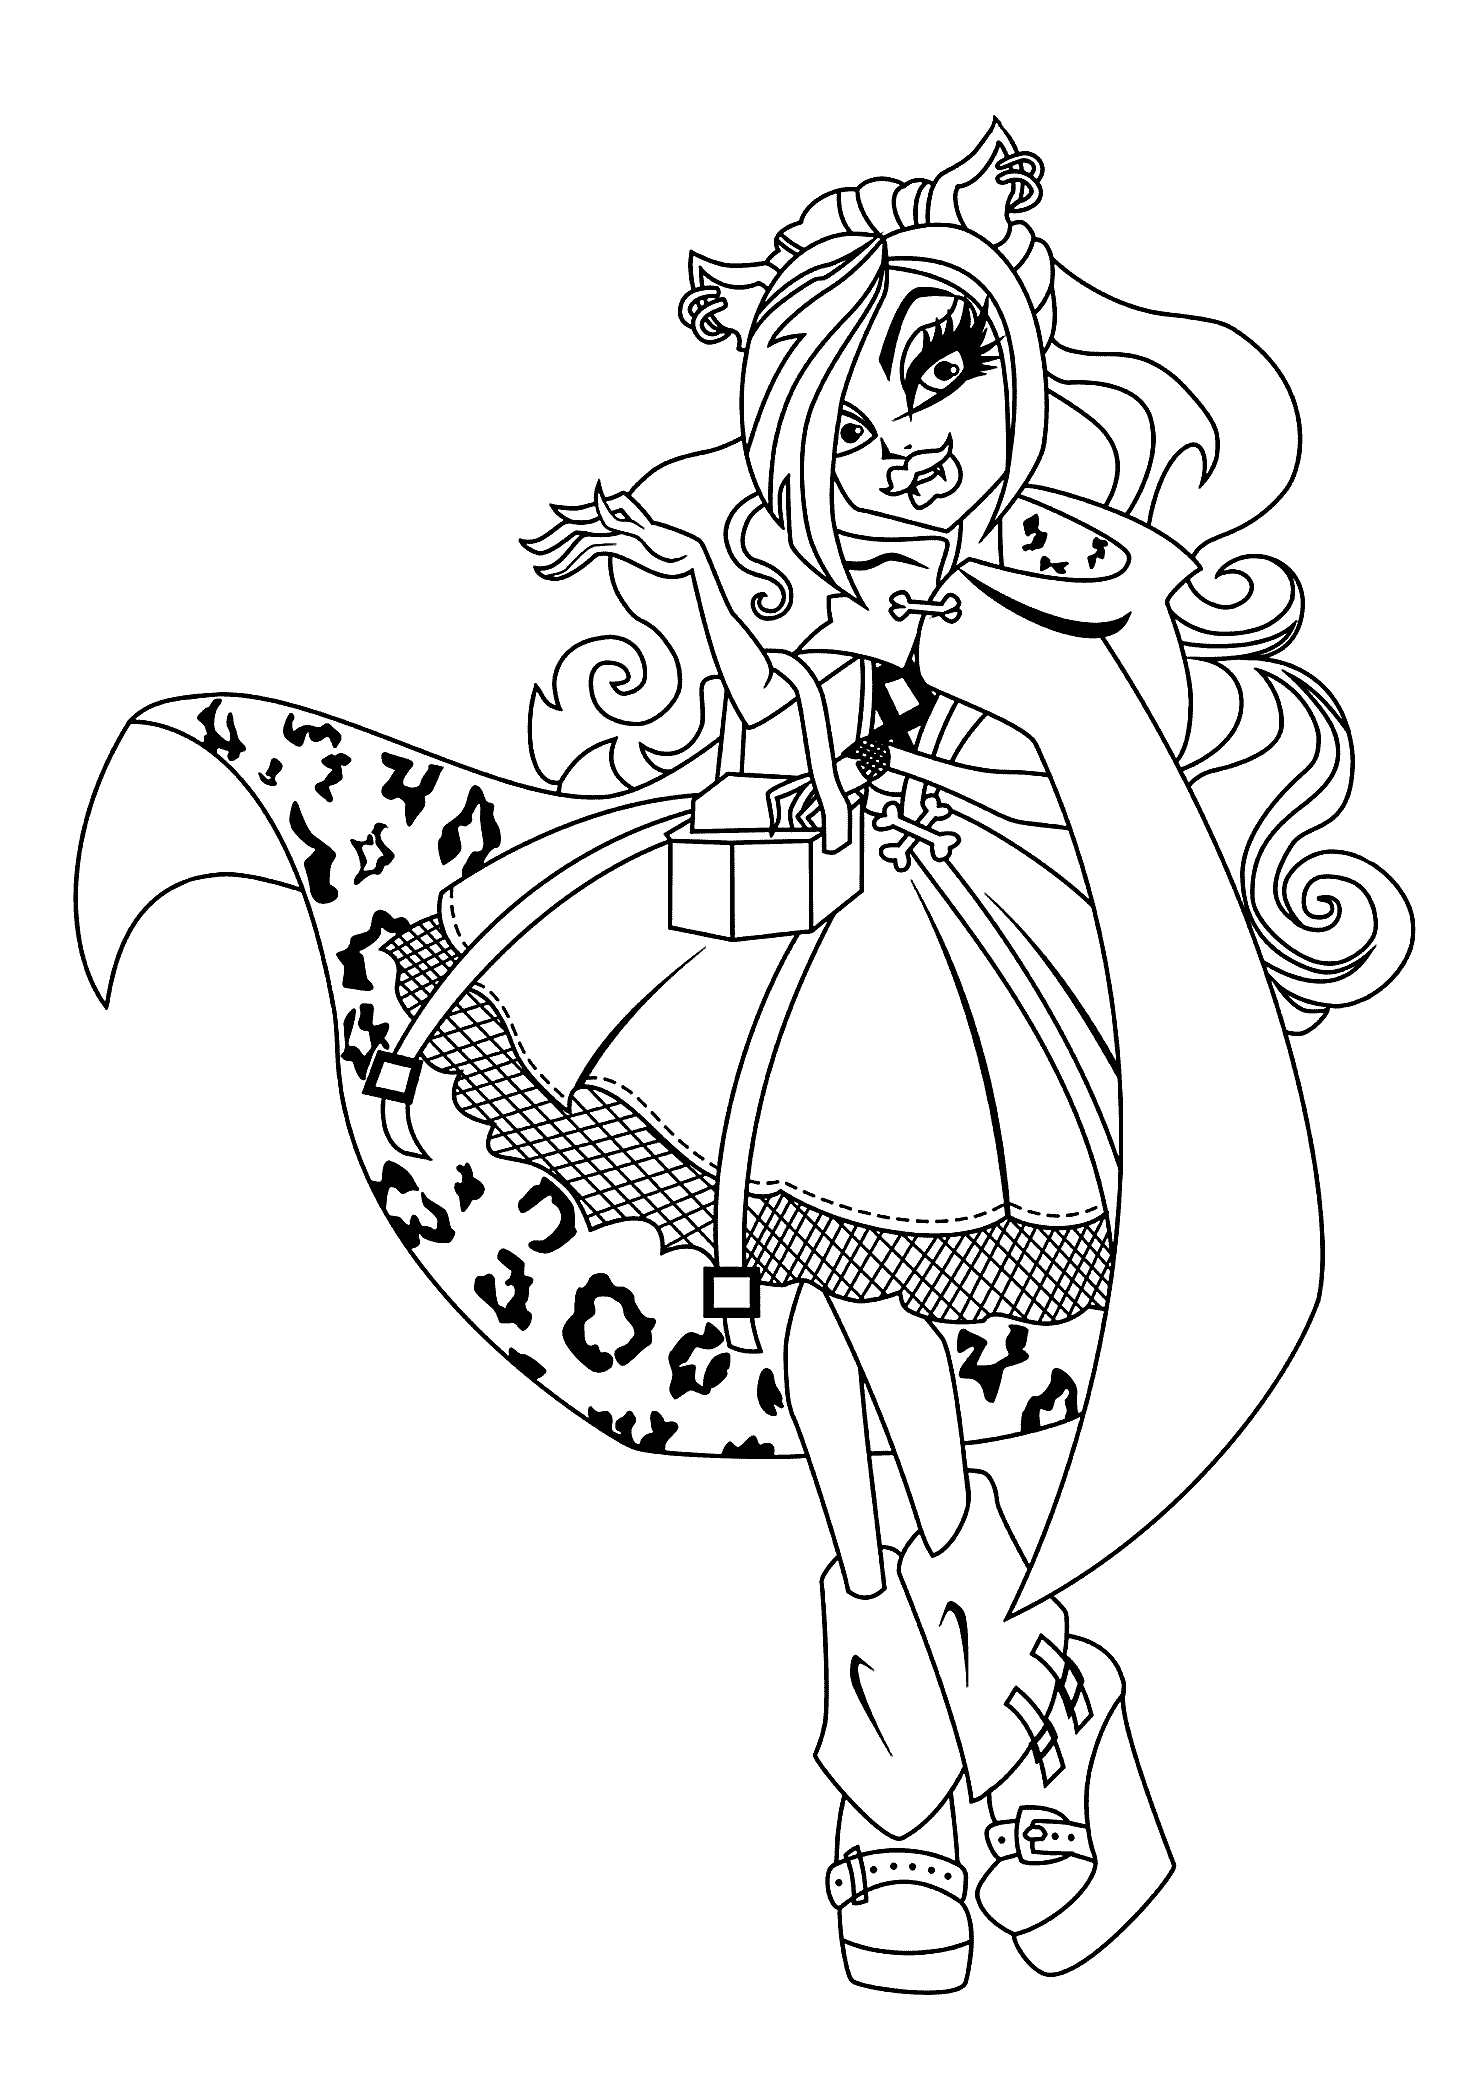 printable monster high pictures monster high coloring pages printable pictures high monster 